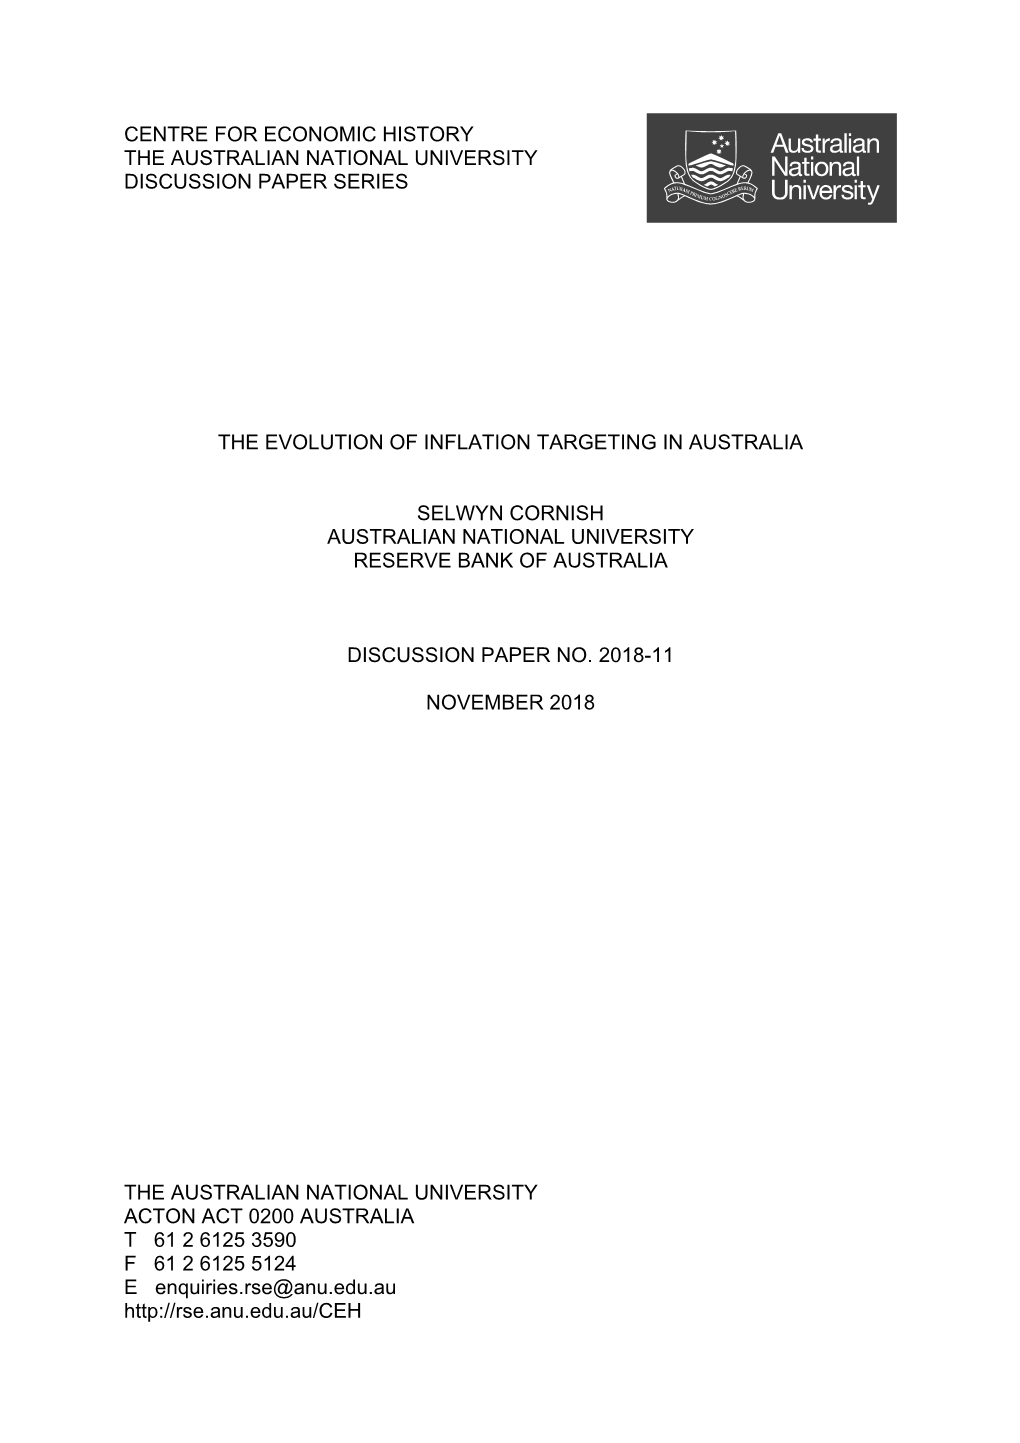 Centre for Economic History the Australian National University Discussion Paper Series